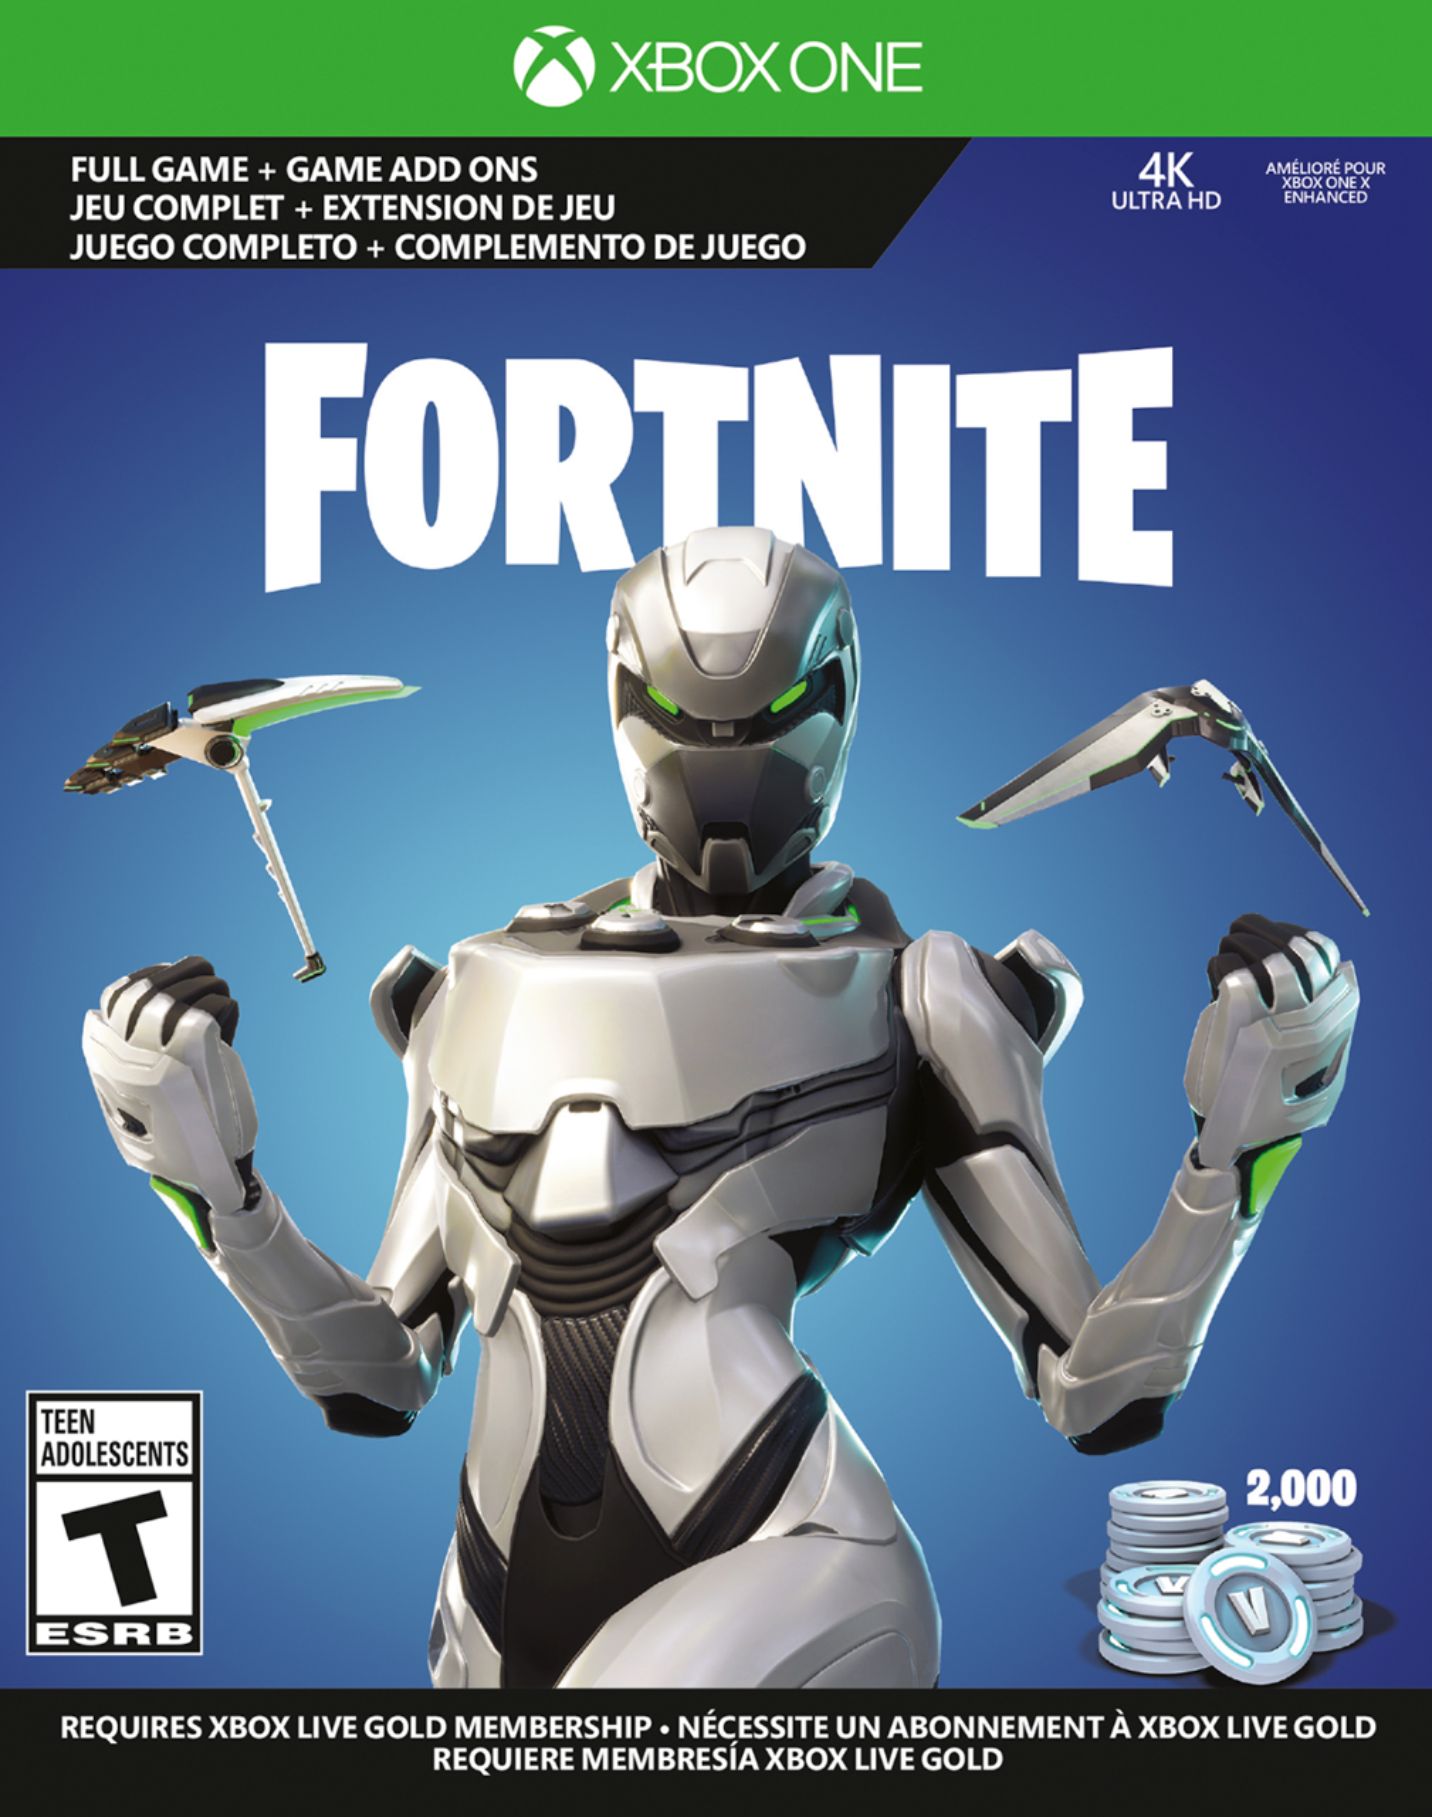 microsoft xbox one s 1tb fortnite bundle with 4k ultra hd blu ray 234 00703 best buy - can you get fortnite on xbox 360 for free